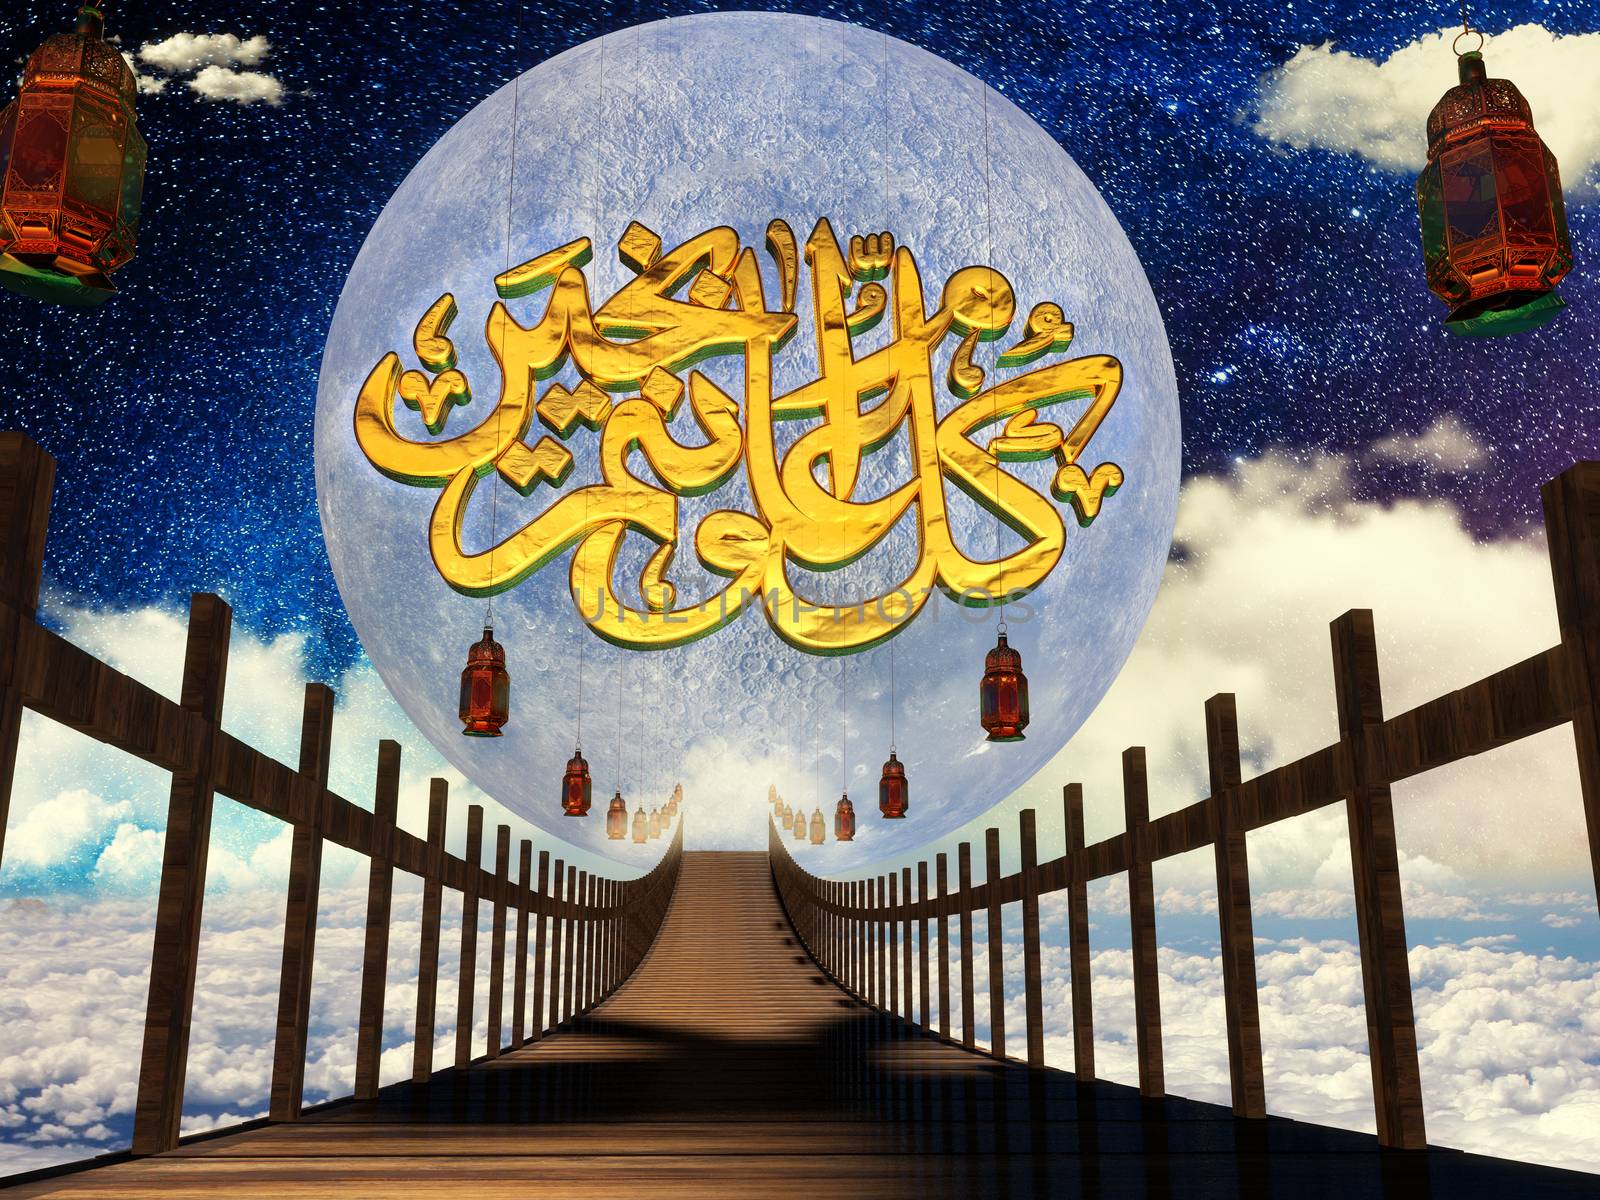 3d scene for islamic events by fares139